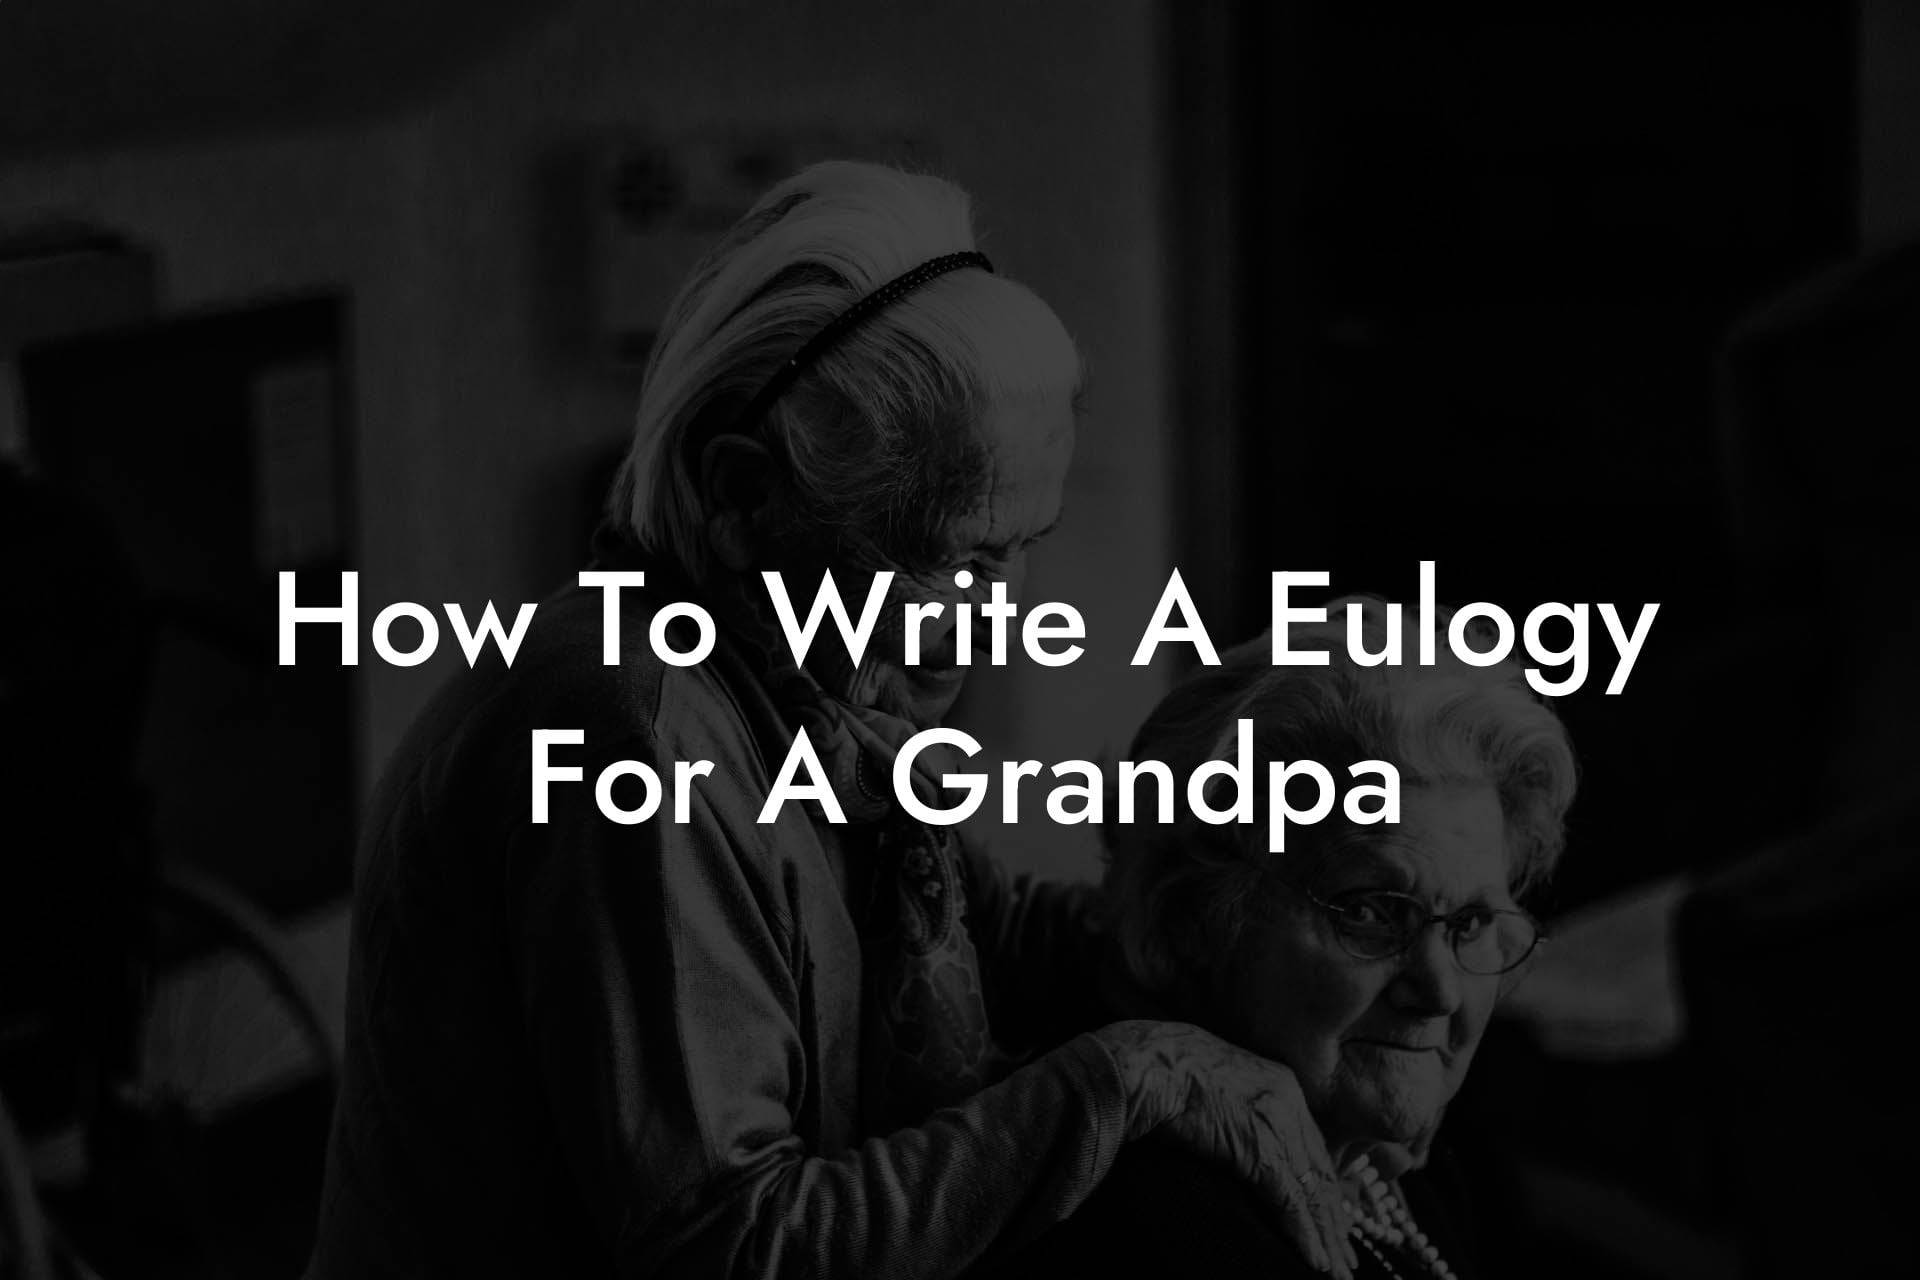 How To Write A Eulogy For A Grandpa